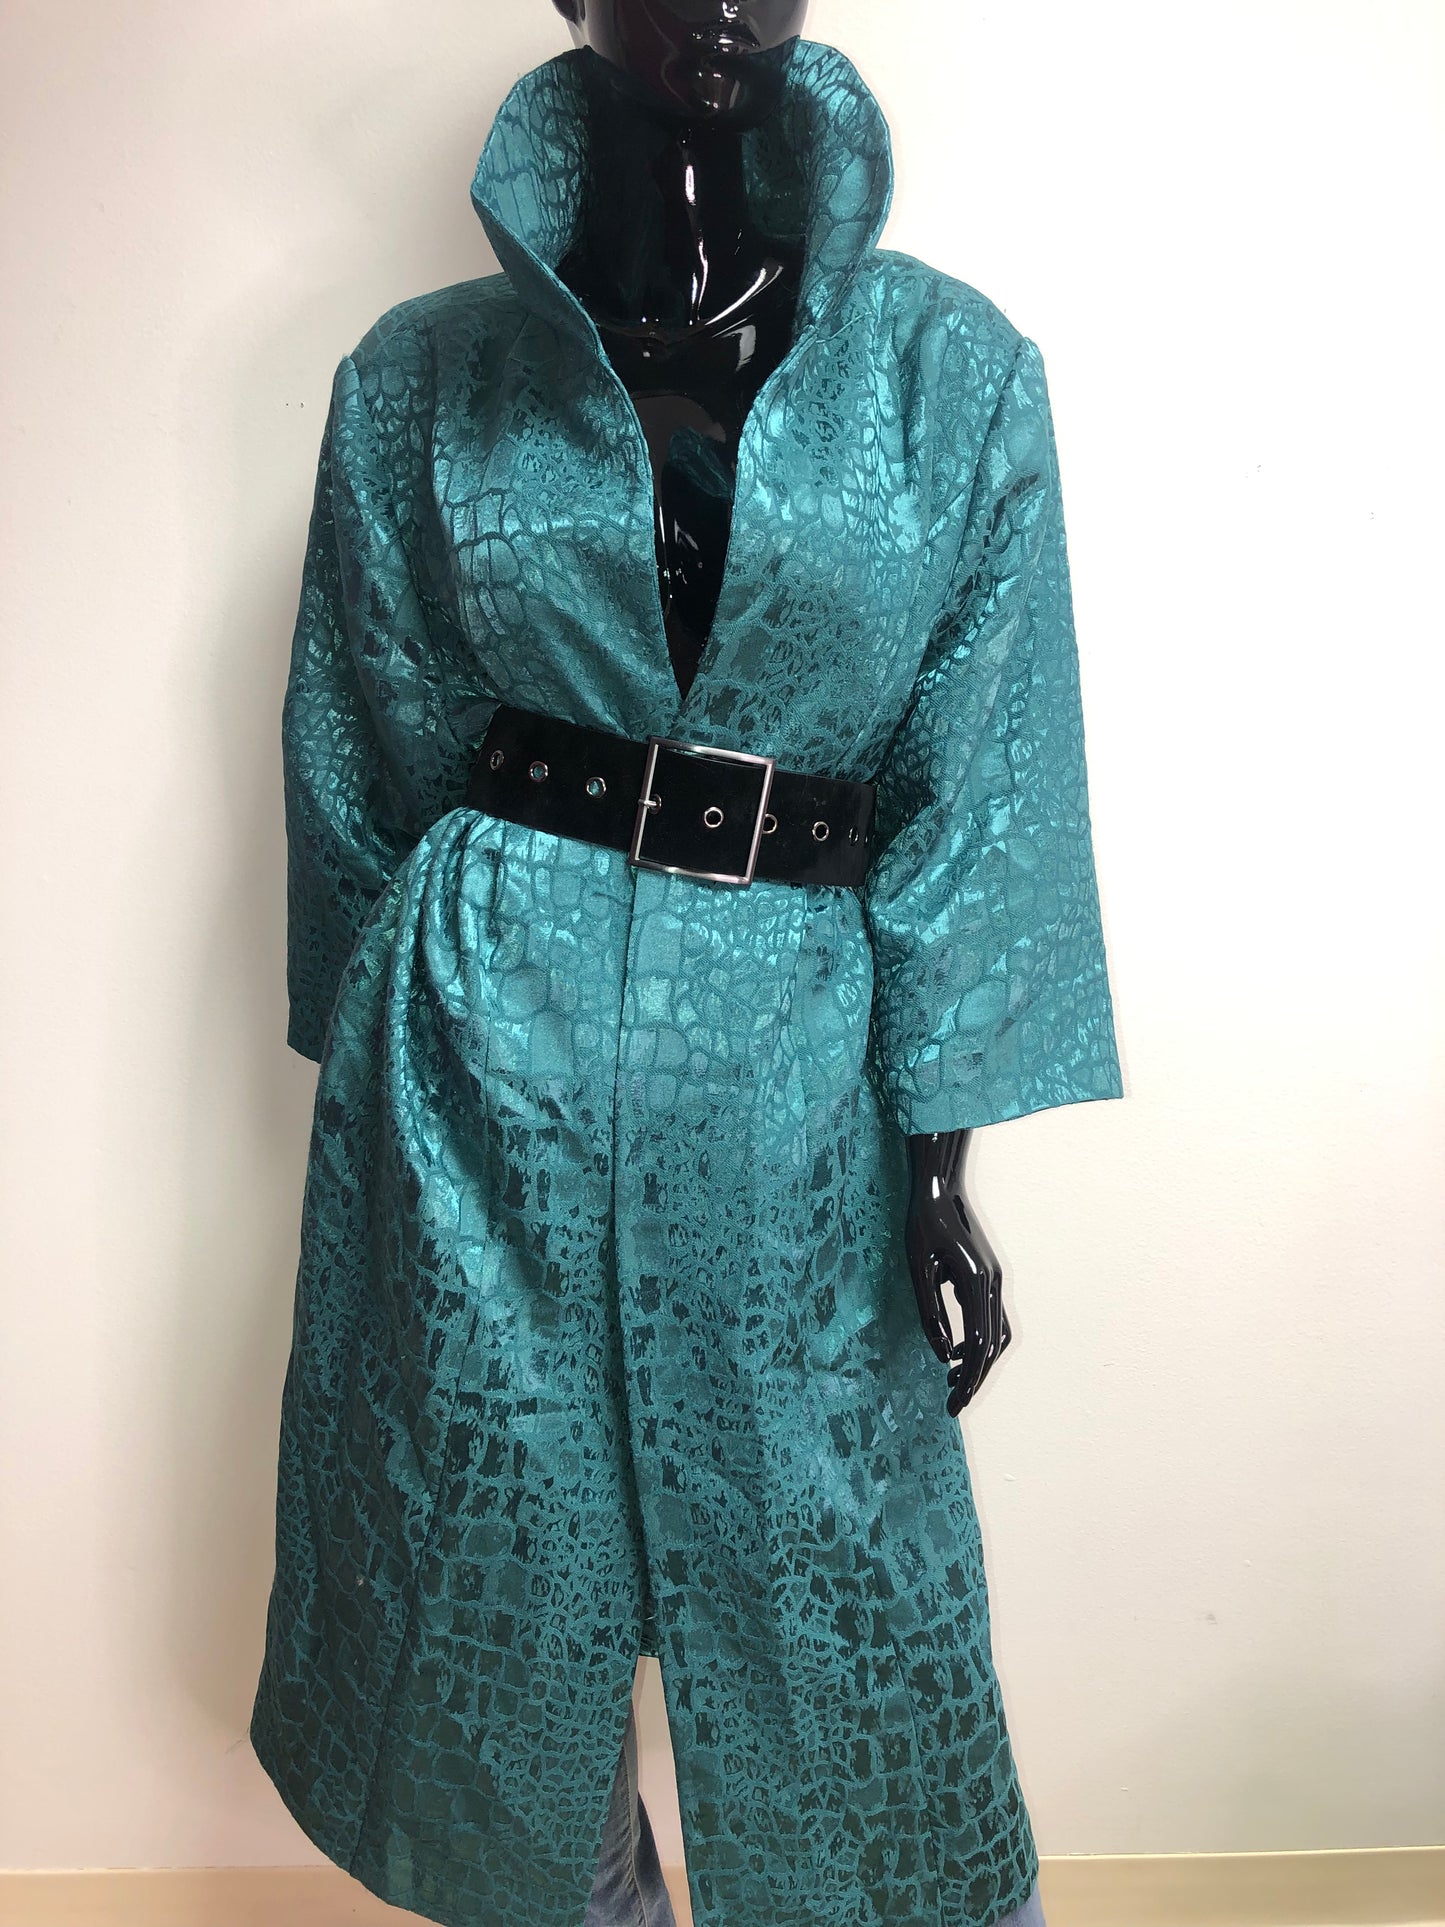 Vintage Teal Taylor Duster Size Free up to XL